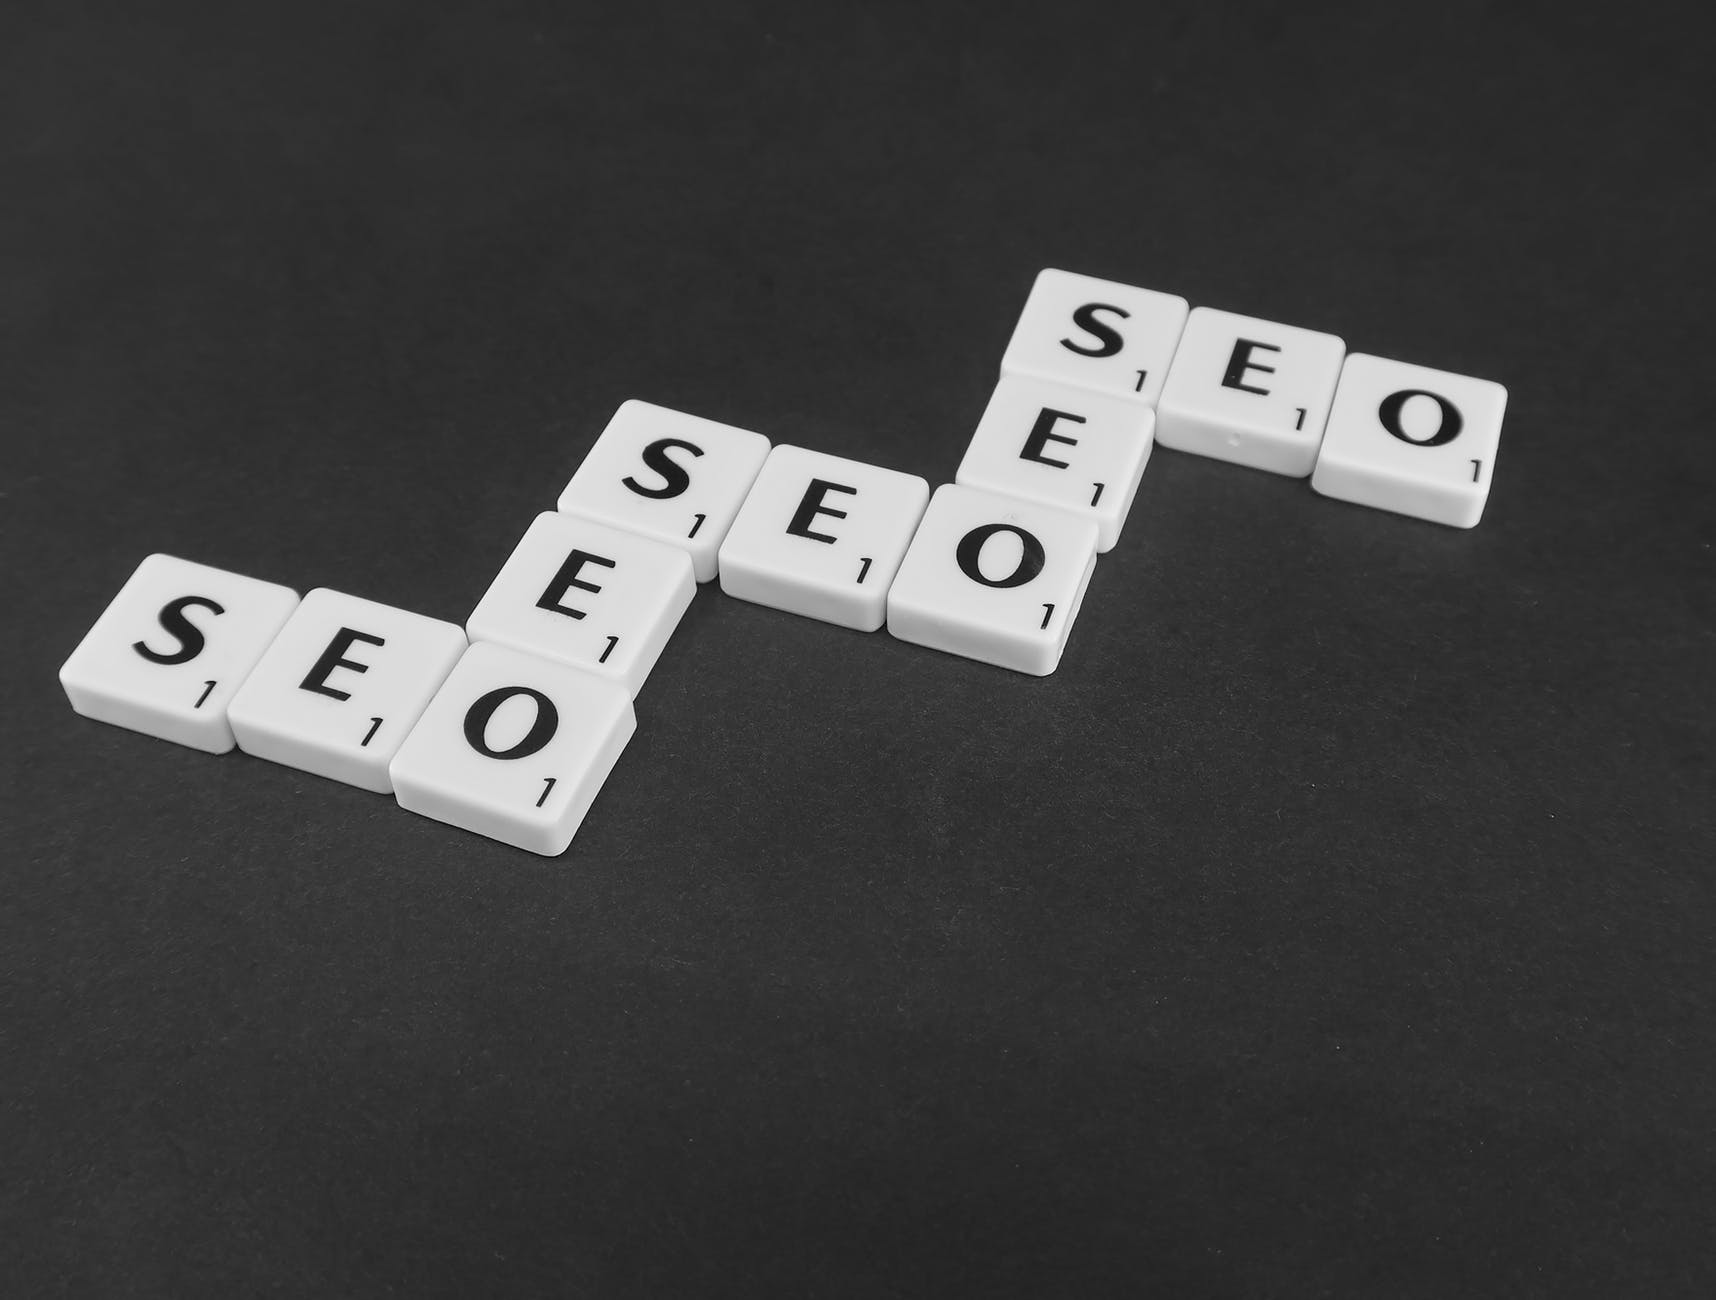 New SEO Options to consider in the New Year